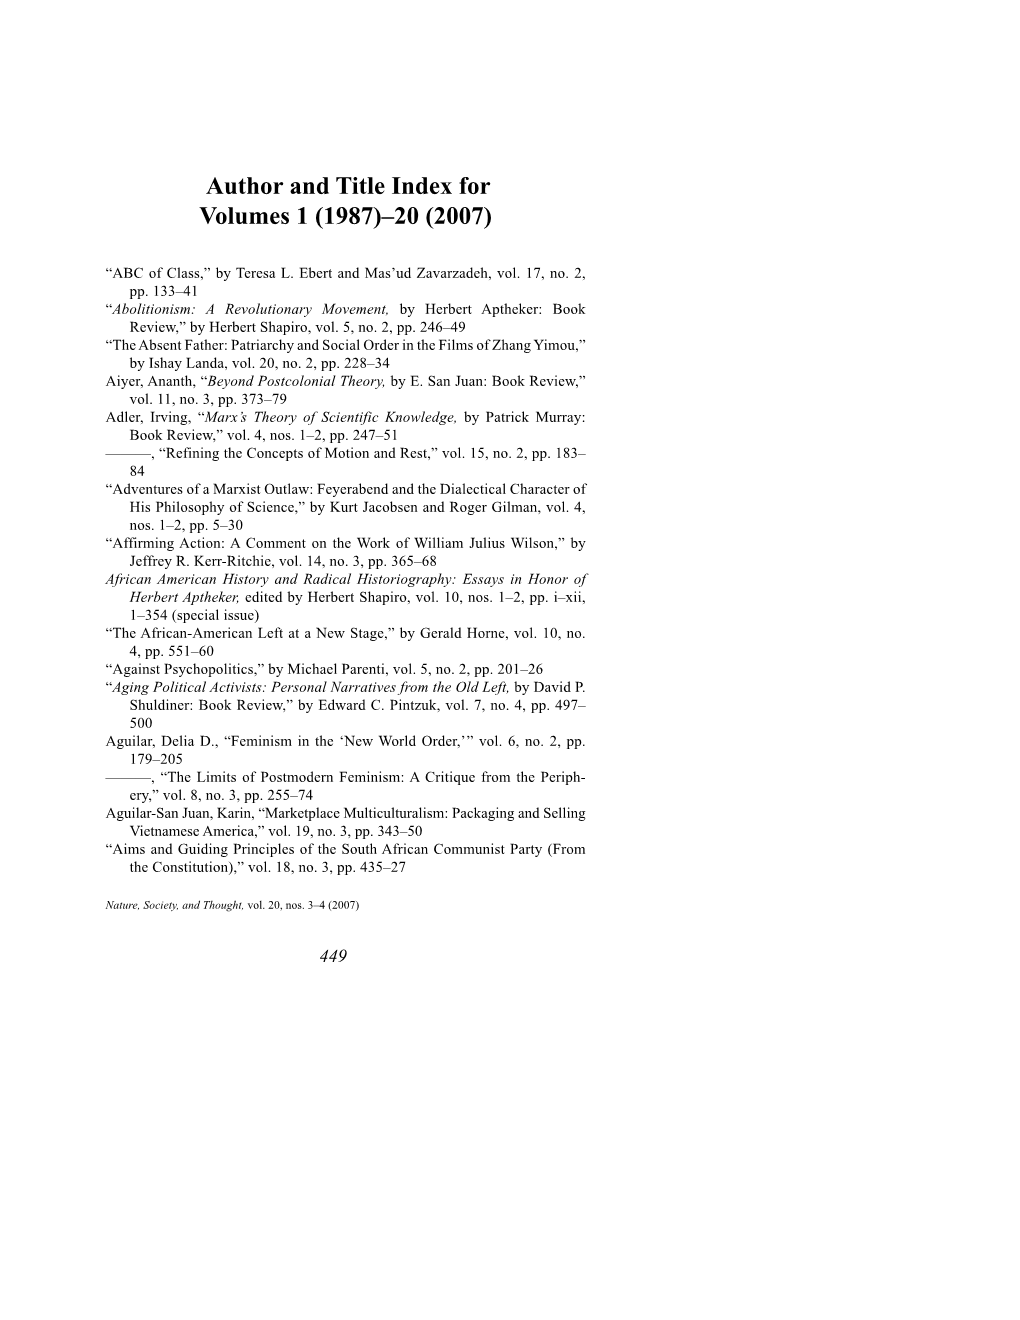 Author and Title Index for Volumes 1 (1987)–20 (2007)